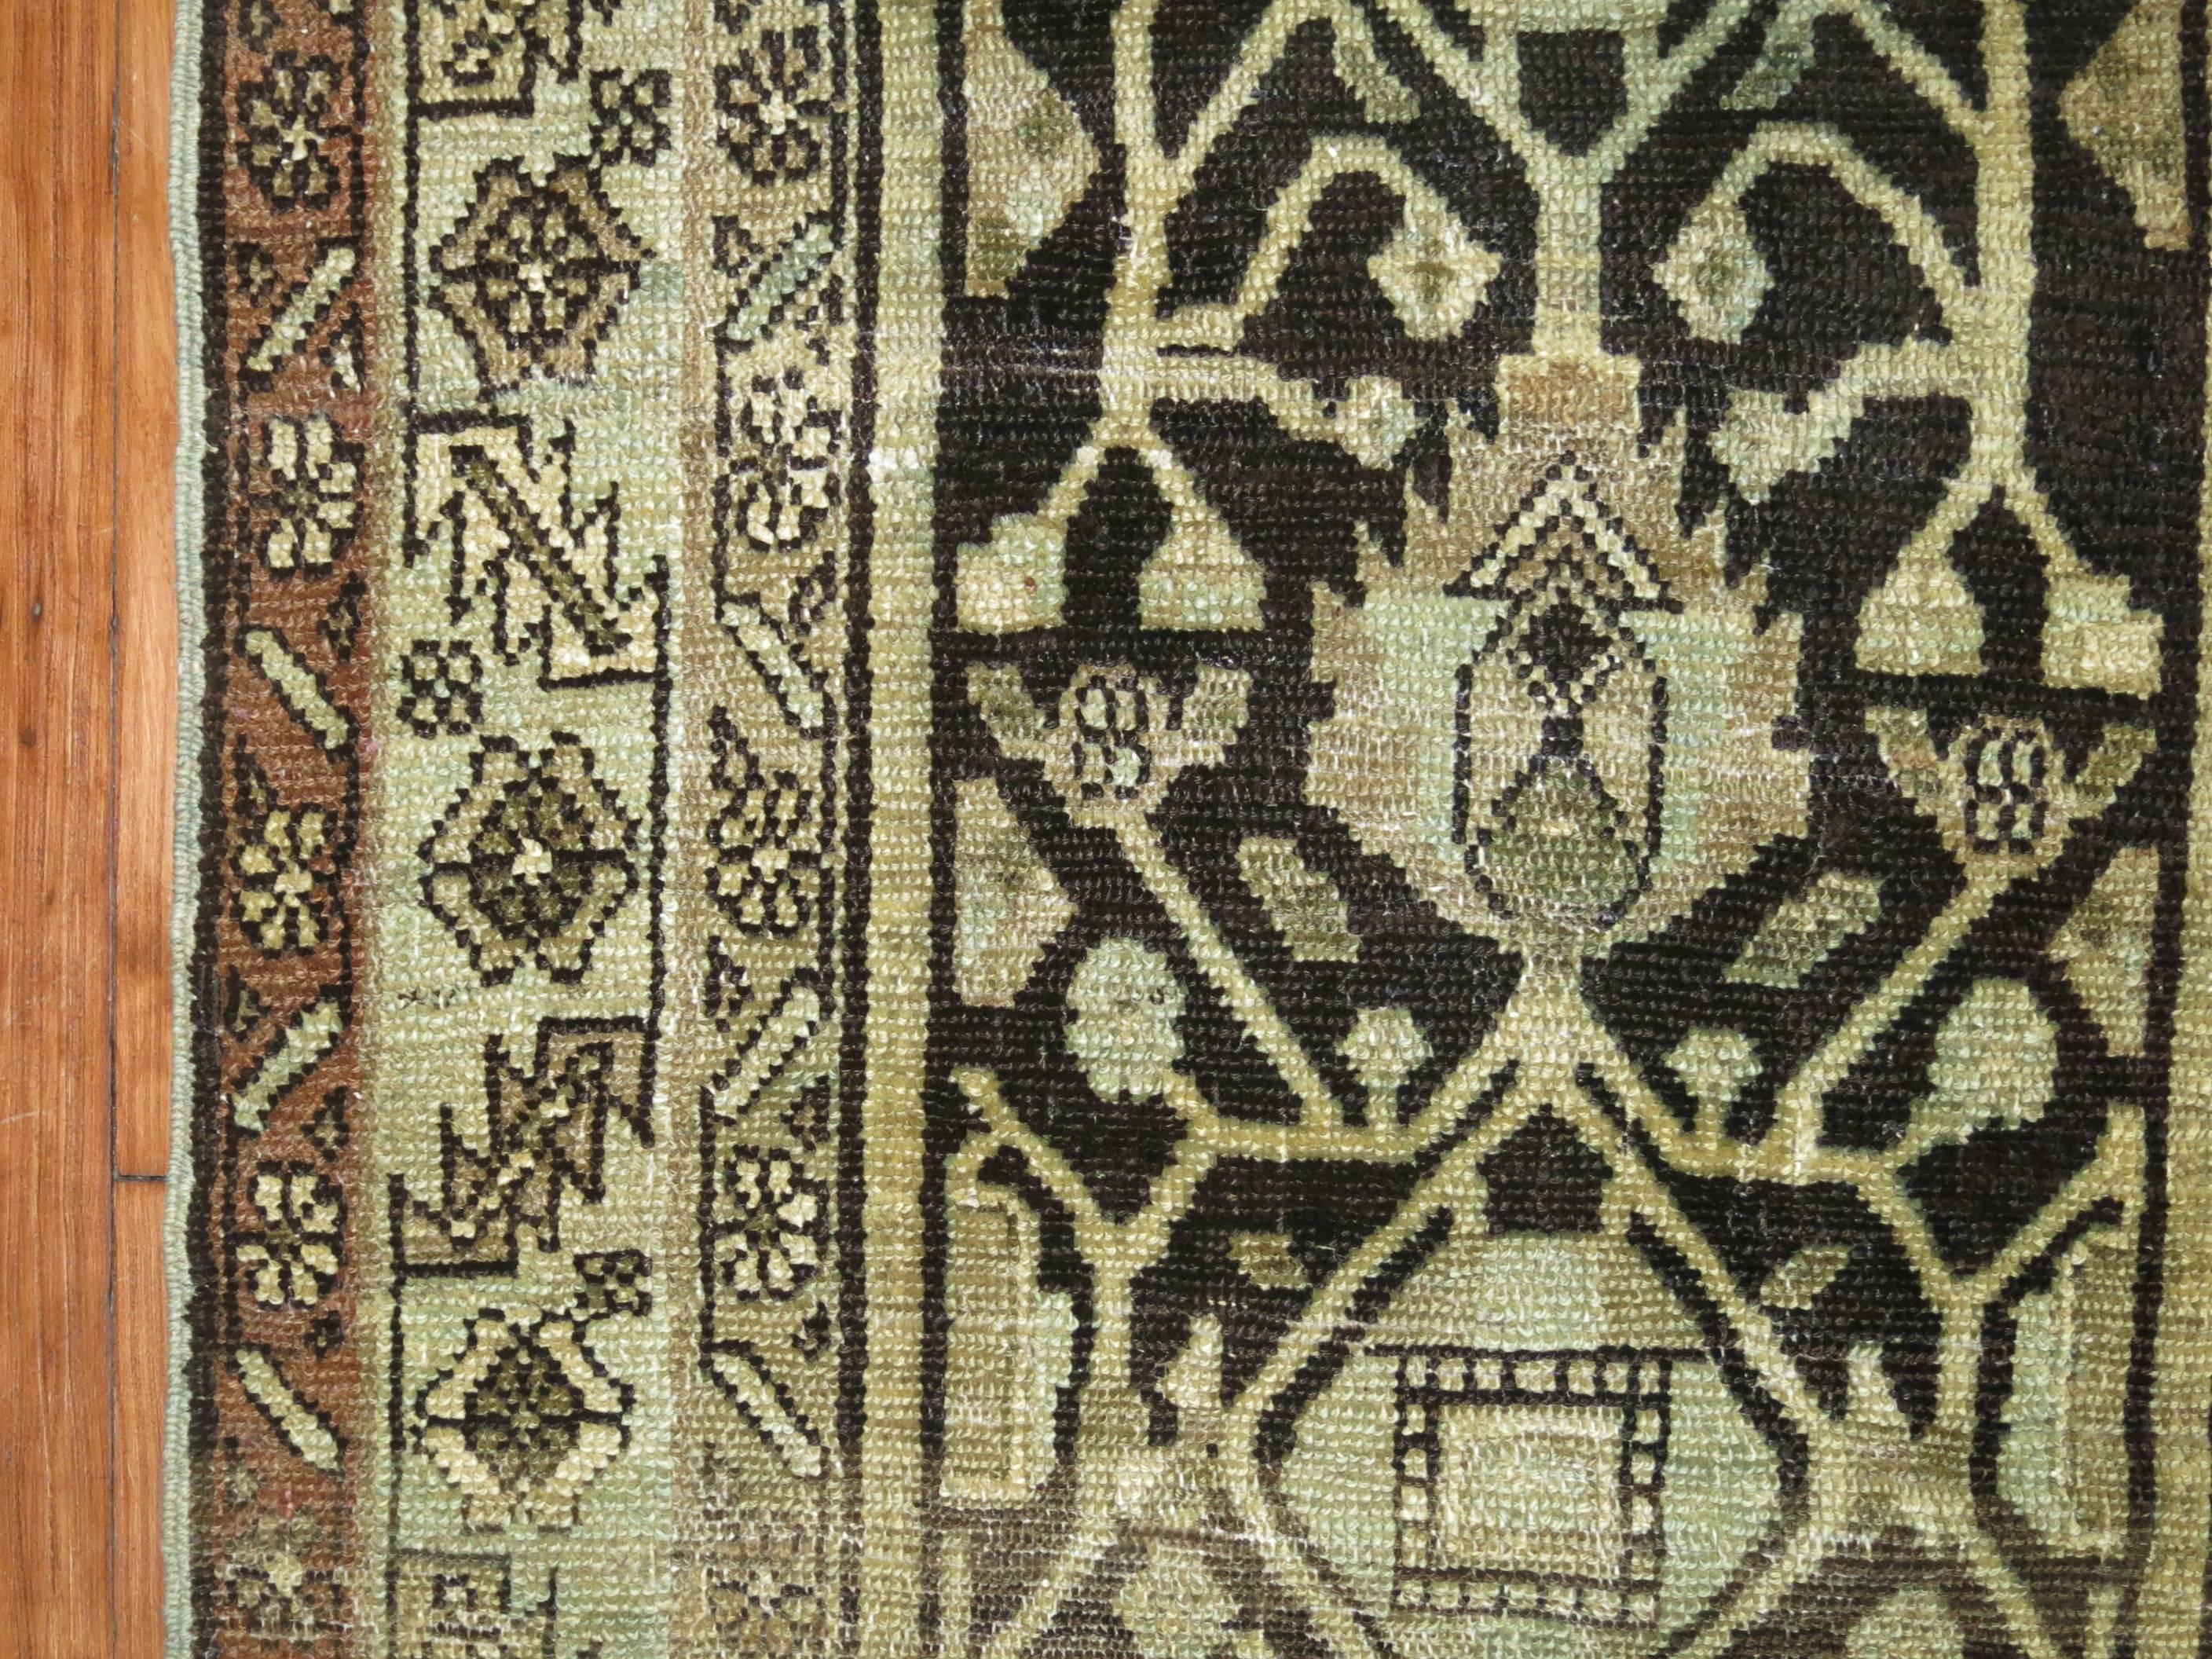 Persian Malayer runner in predominant browns and charcoal.